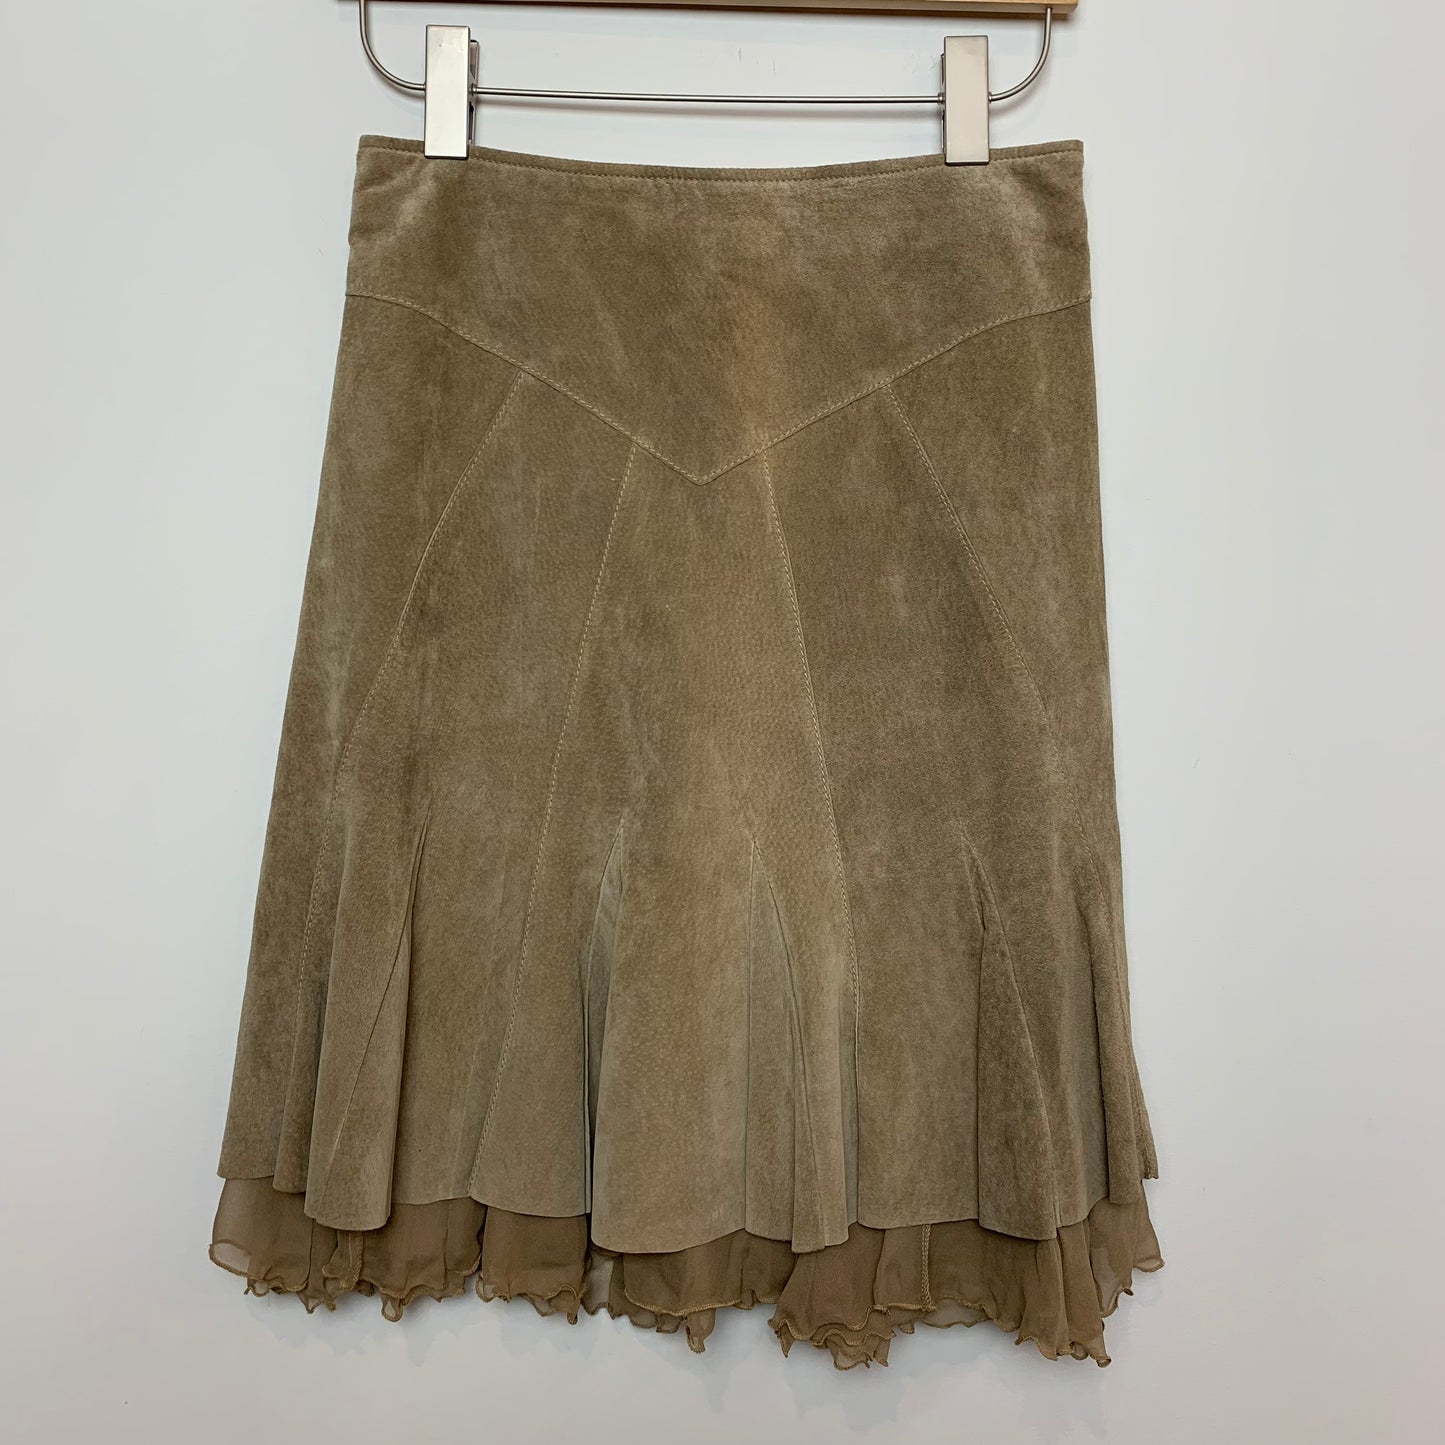 June Suede Leather Flared Skirt with Ruffle 0